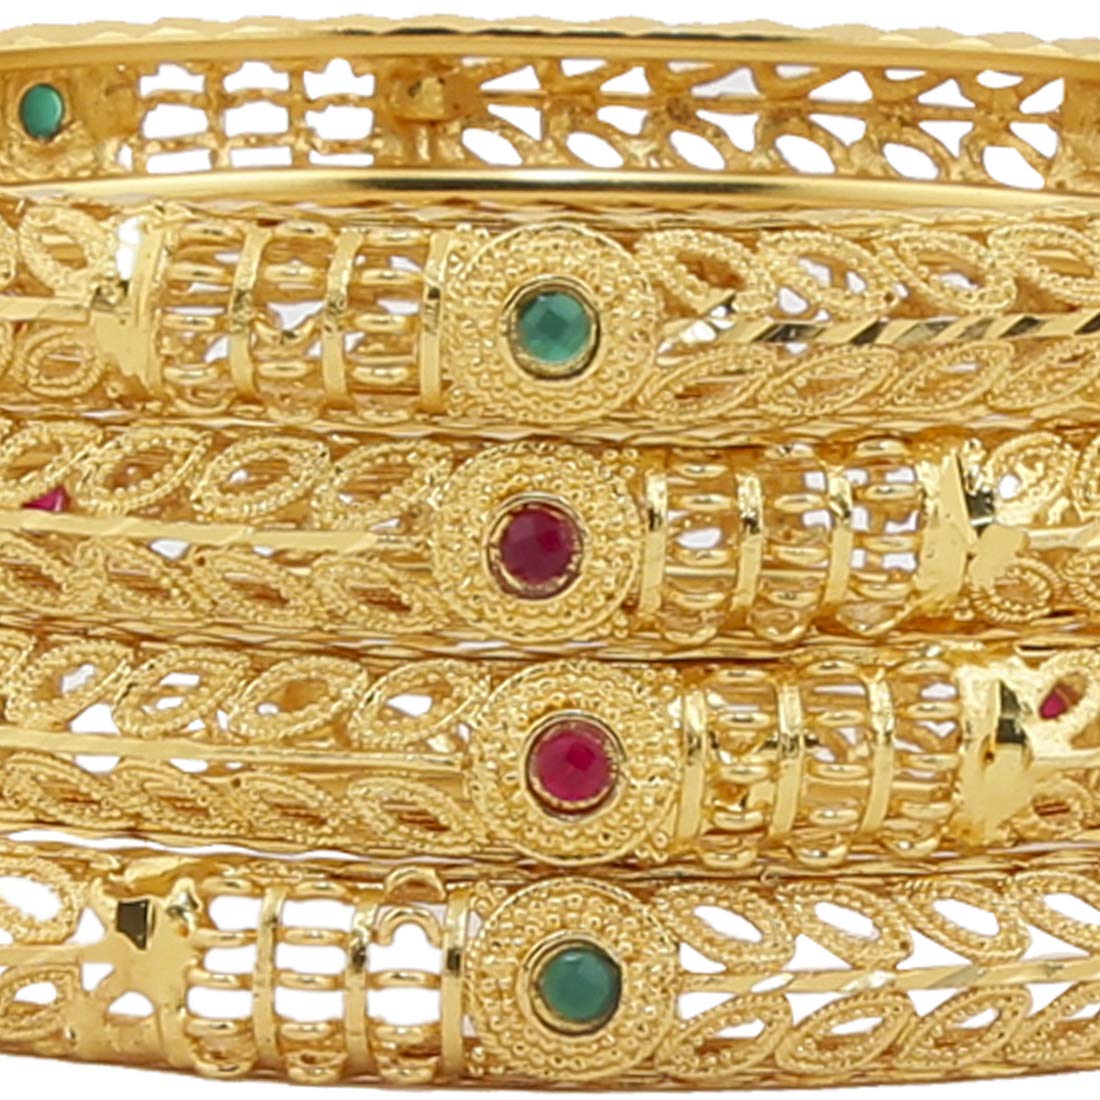 Yellow Chimes Classic Design Ethnic Look Studded Stones 4 PCs Traditional Gold Plated Bangles Set for Women and Girls (2.6)